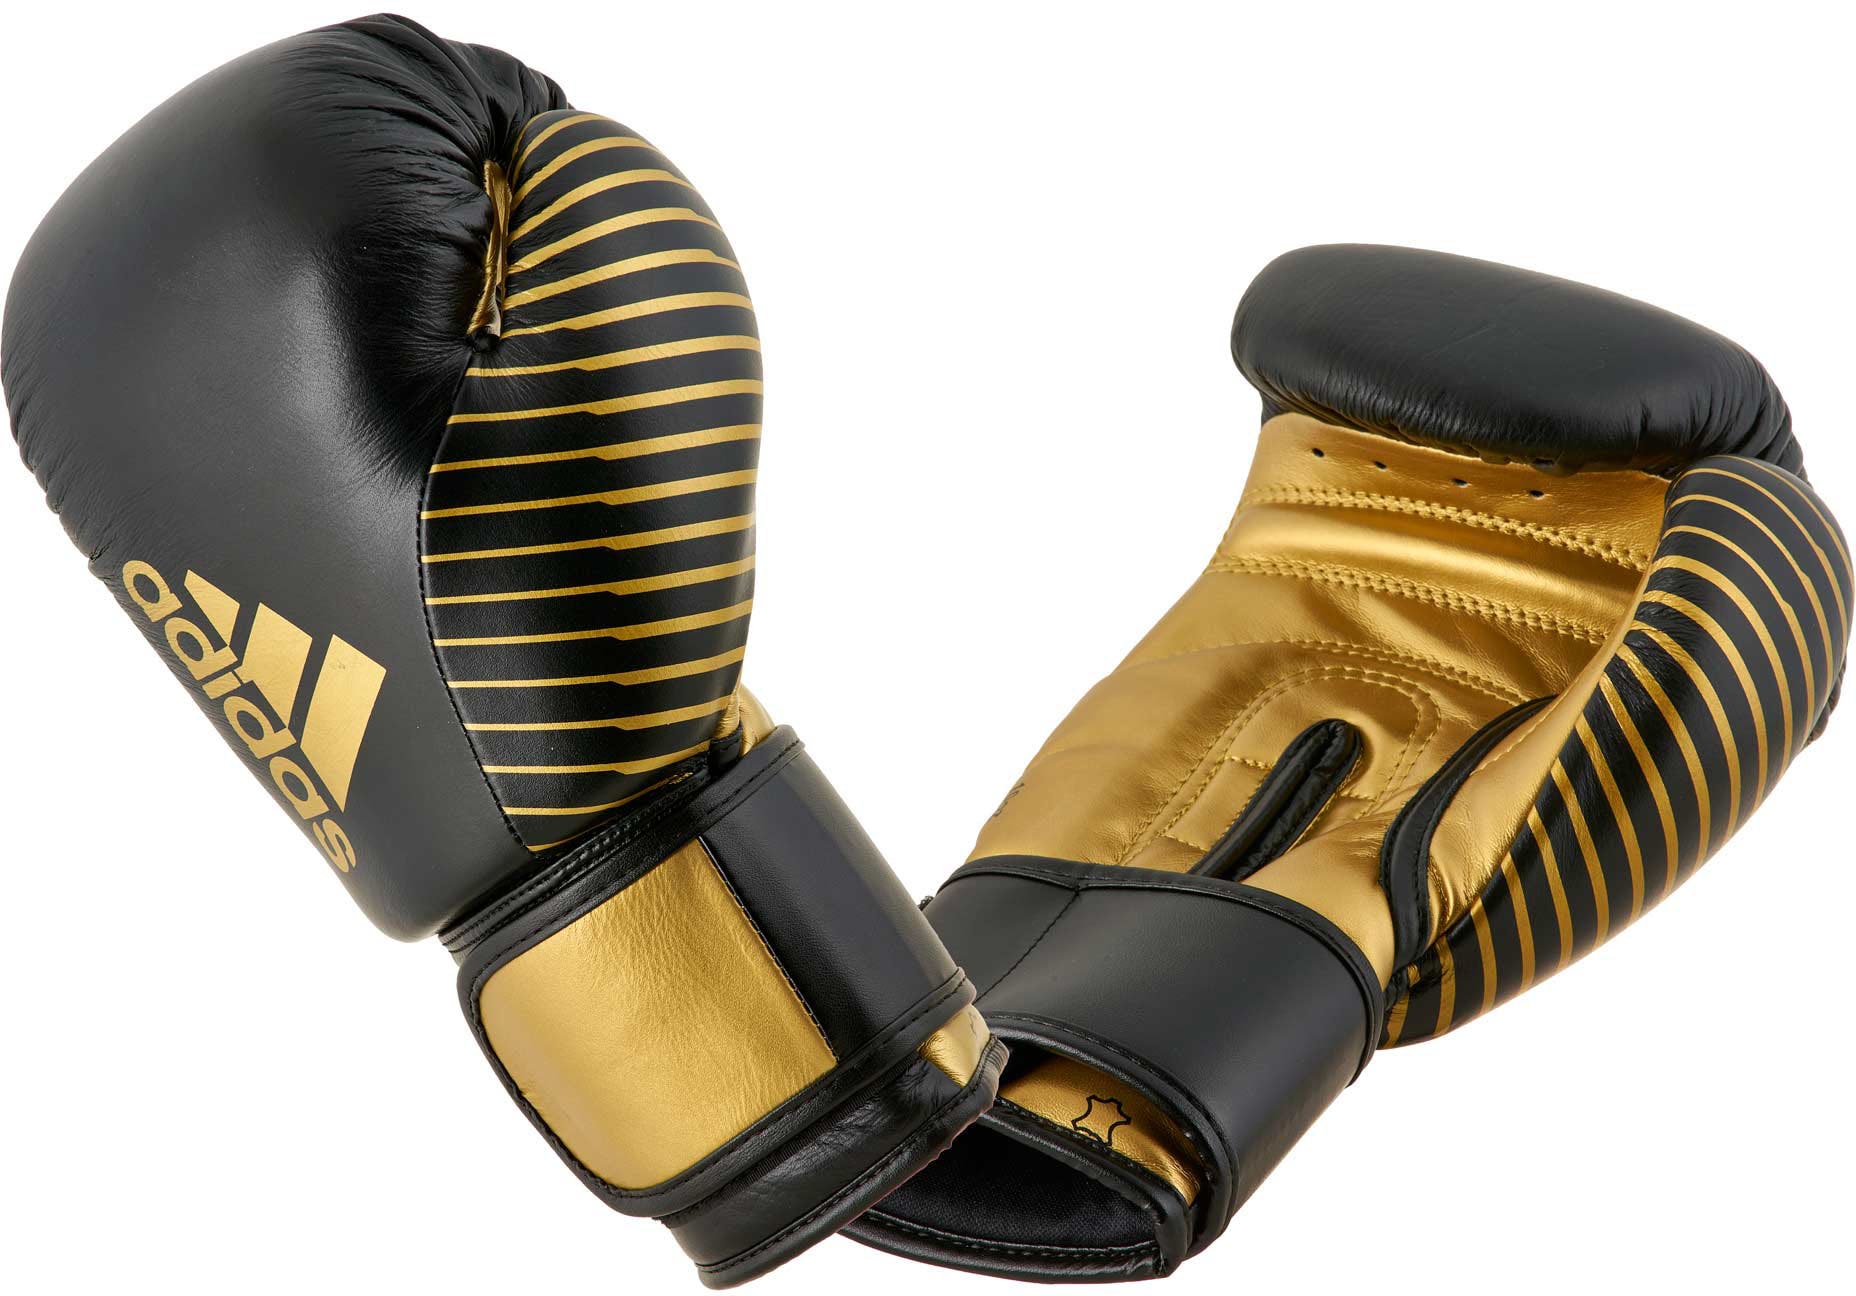 Boxhandschuhe »Competition Handschuh«